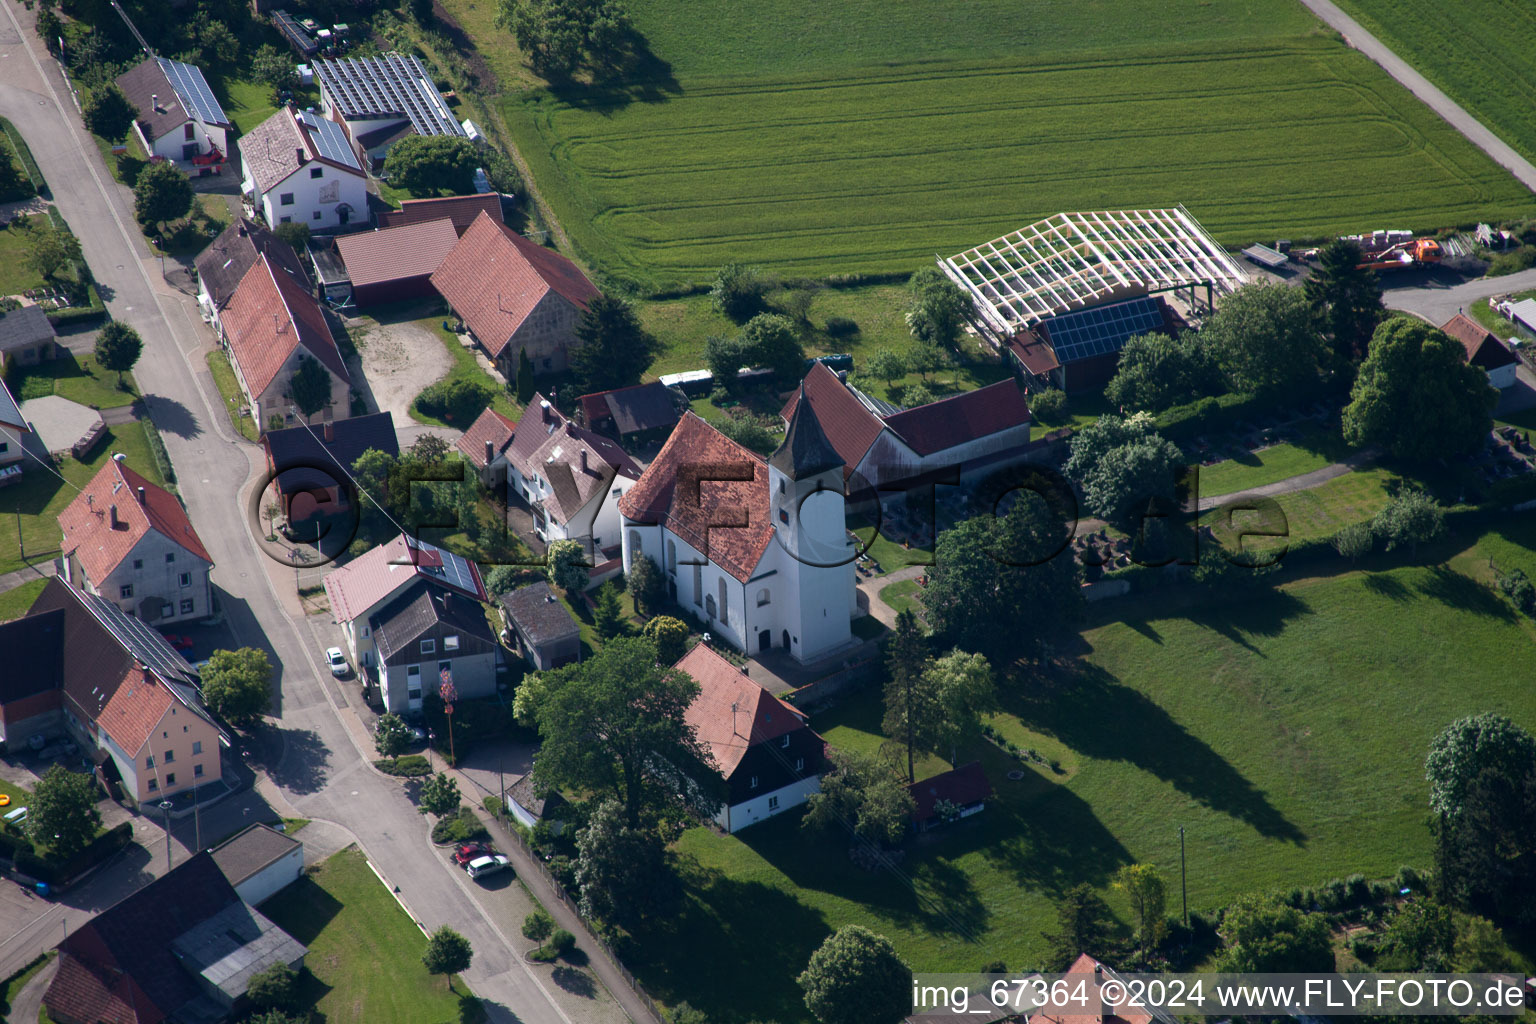 Aerial photograpy of Village - view on the edge of agricultural fields and farmland in Allmendingen in the state Baden-Wurttemberg, Germany